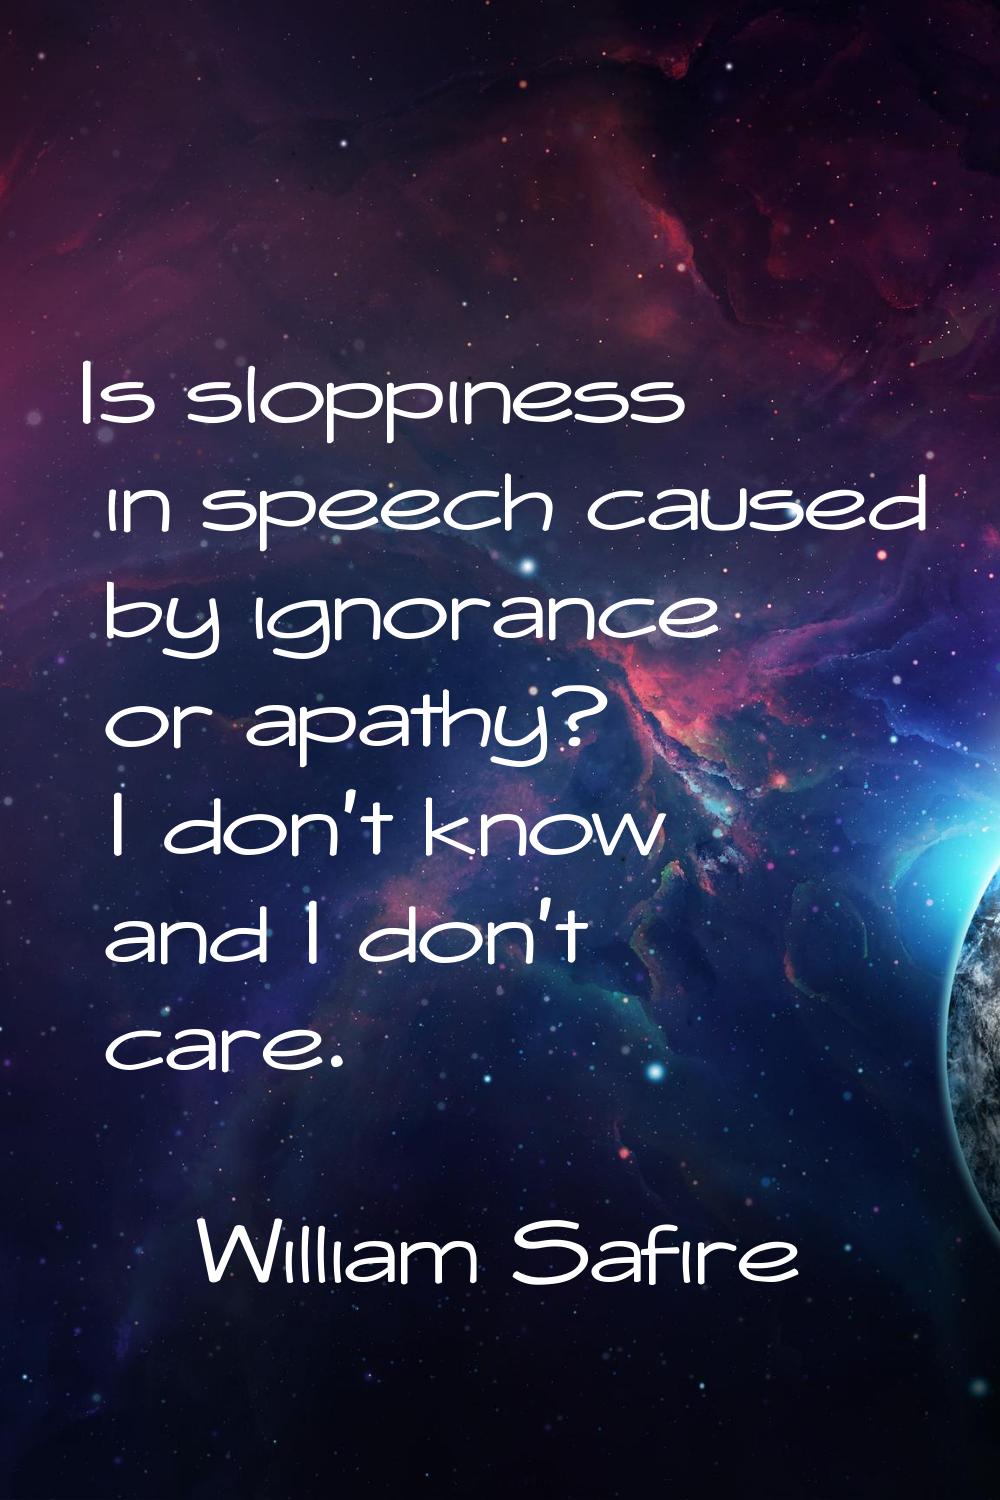 Is sloppiness in speech caused by ignorance or apathy? I don't know and I don't care.